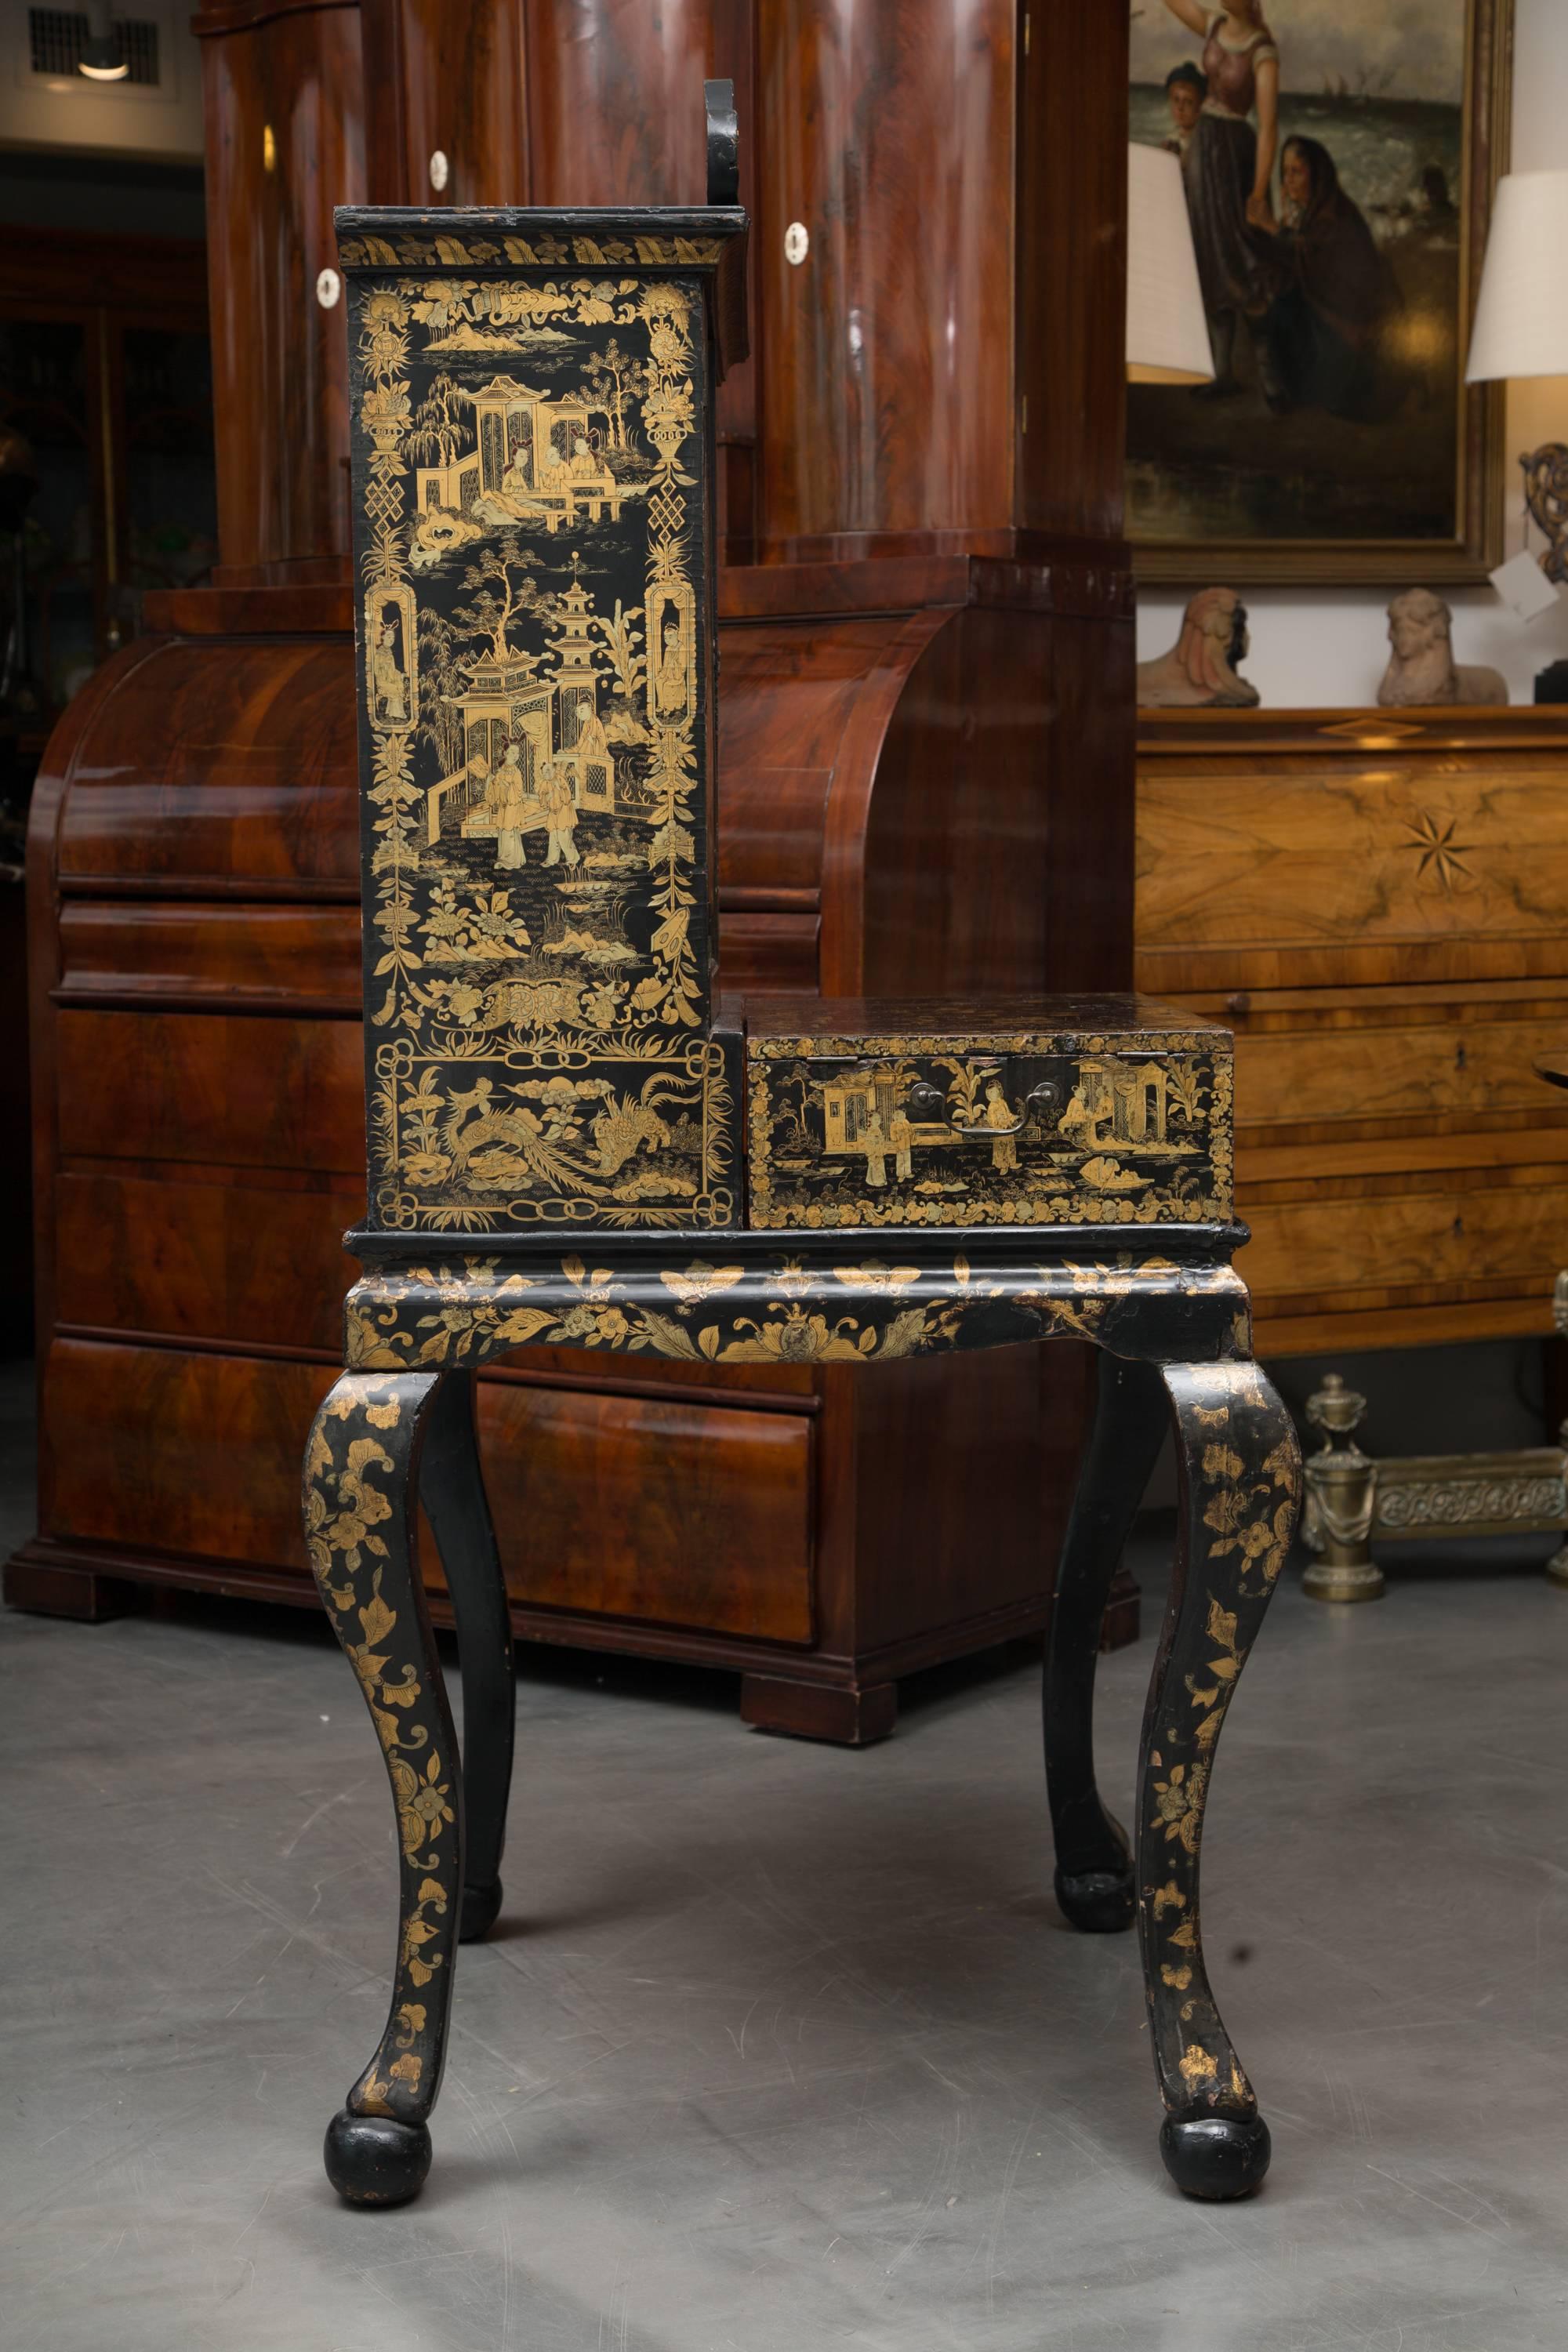 This is an elegant English black lacquered English Queen Anne cabinet chest on Stand decorated overall with gilt chinoiseries. This case piece was originally a traveling secretary.  The top section has a cornice with a broken pediment over a